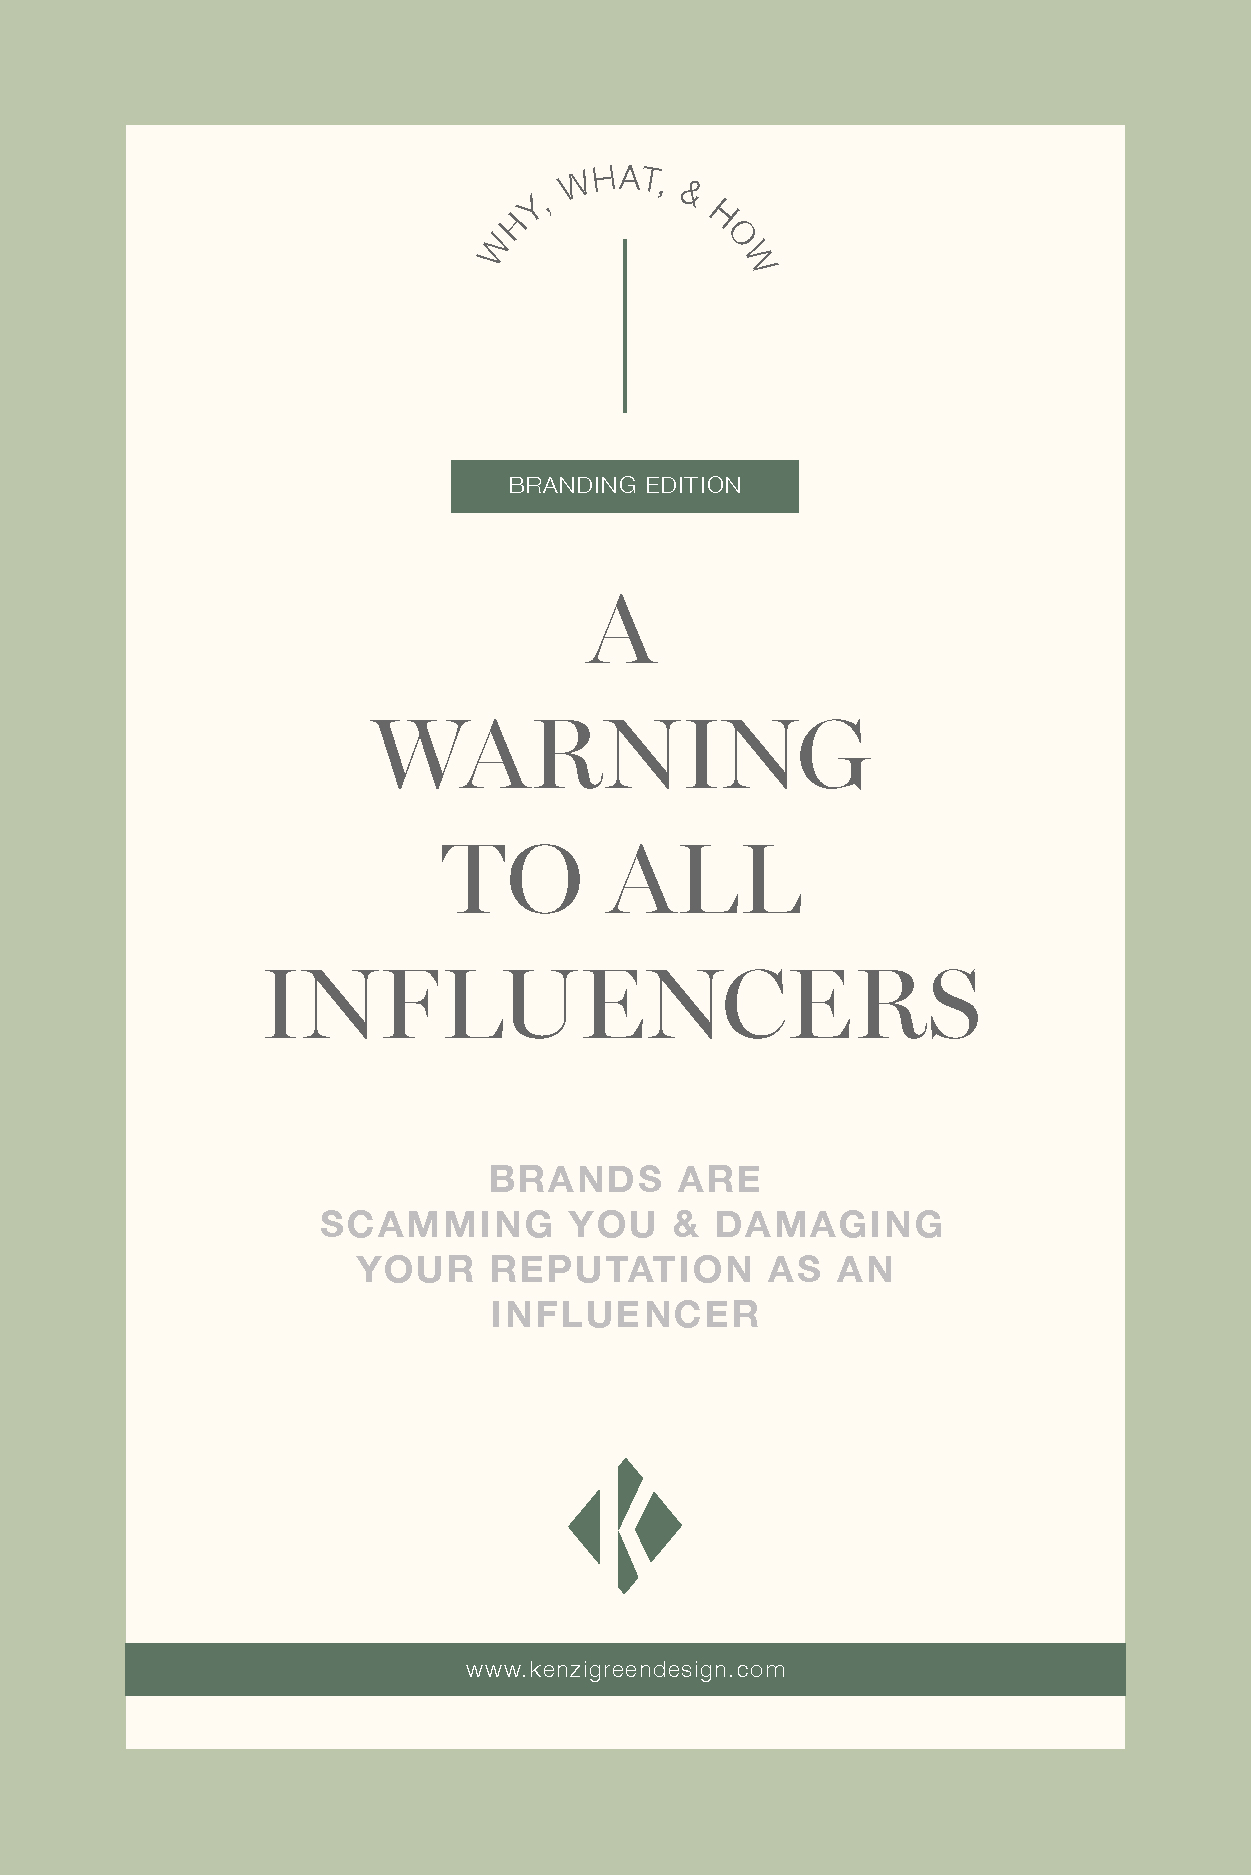 A warning to all influencers